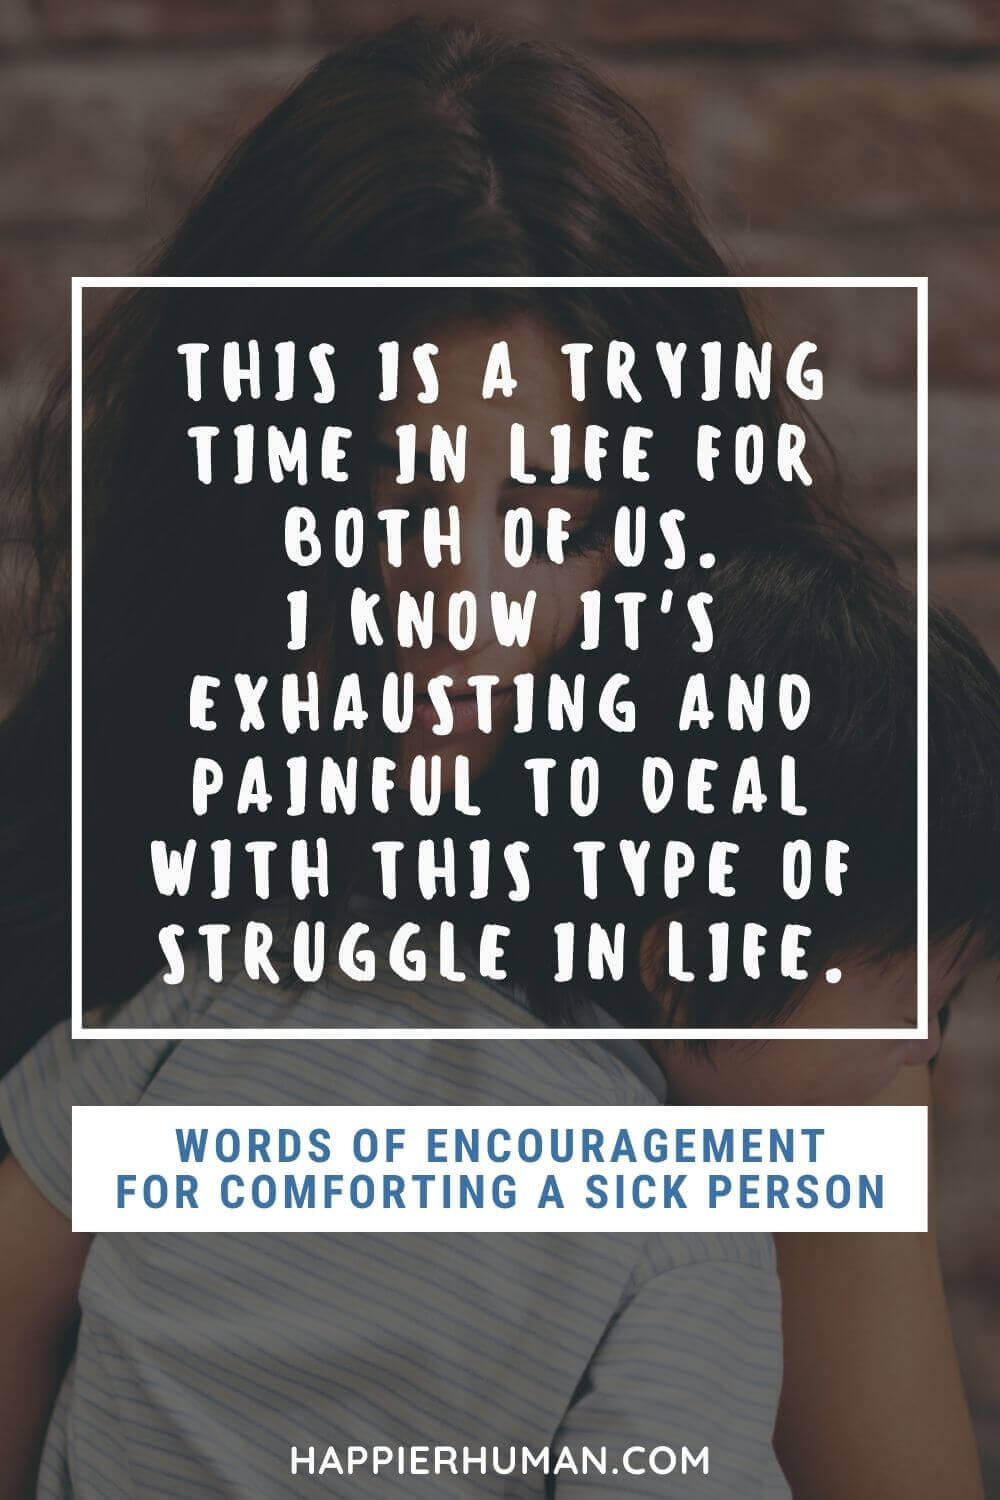 Words of Encouragement for Sick Person - This is a trying time in life for both of us. I know it's exhausting and painful to deal with this type of struggle in life. | words of encouragement for sick person religious | words of encouragement for sick person family | words of encouragement for sick person with cancer